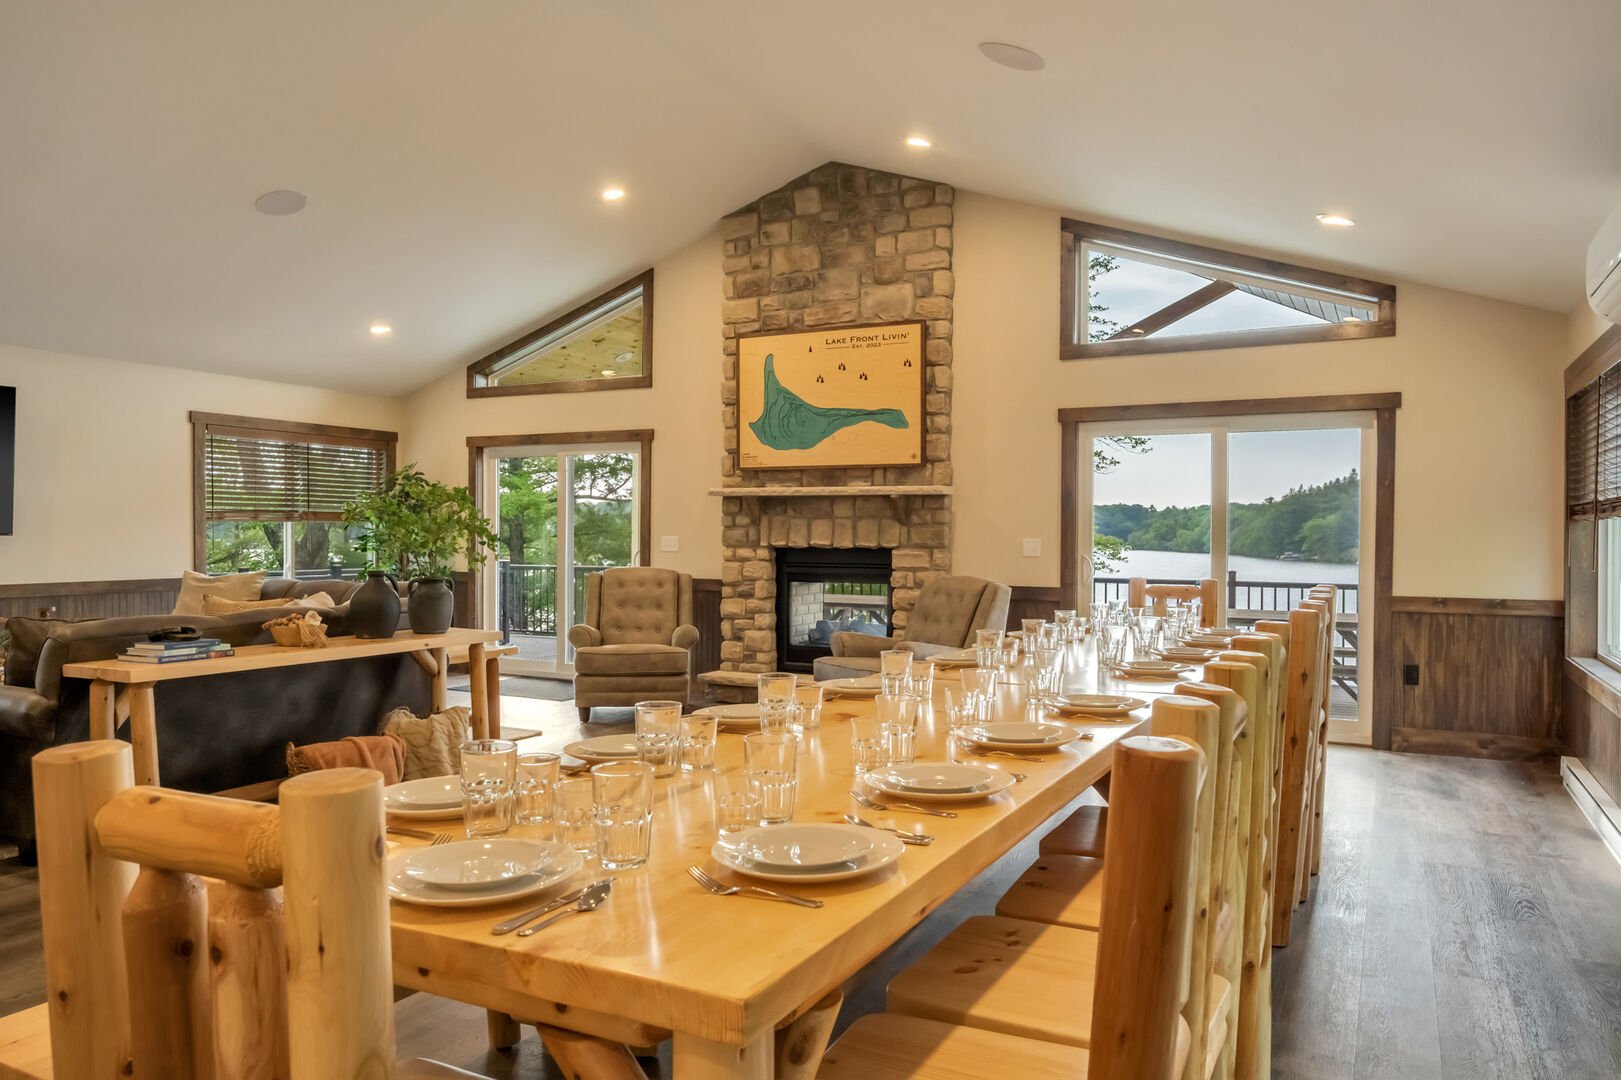 Spacious and Grand!!
Lake Front Livin is the perfect home to host large Family Gatherings. Views of the Mountains and Lake from the Great Room, Dining area and Kitchen.